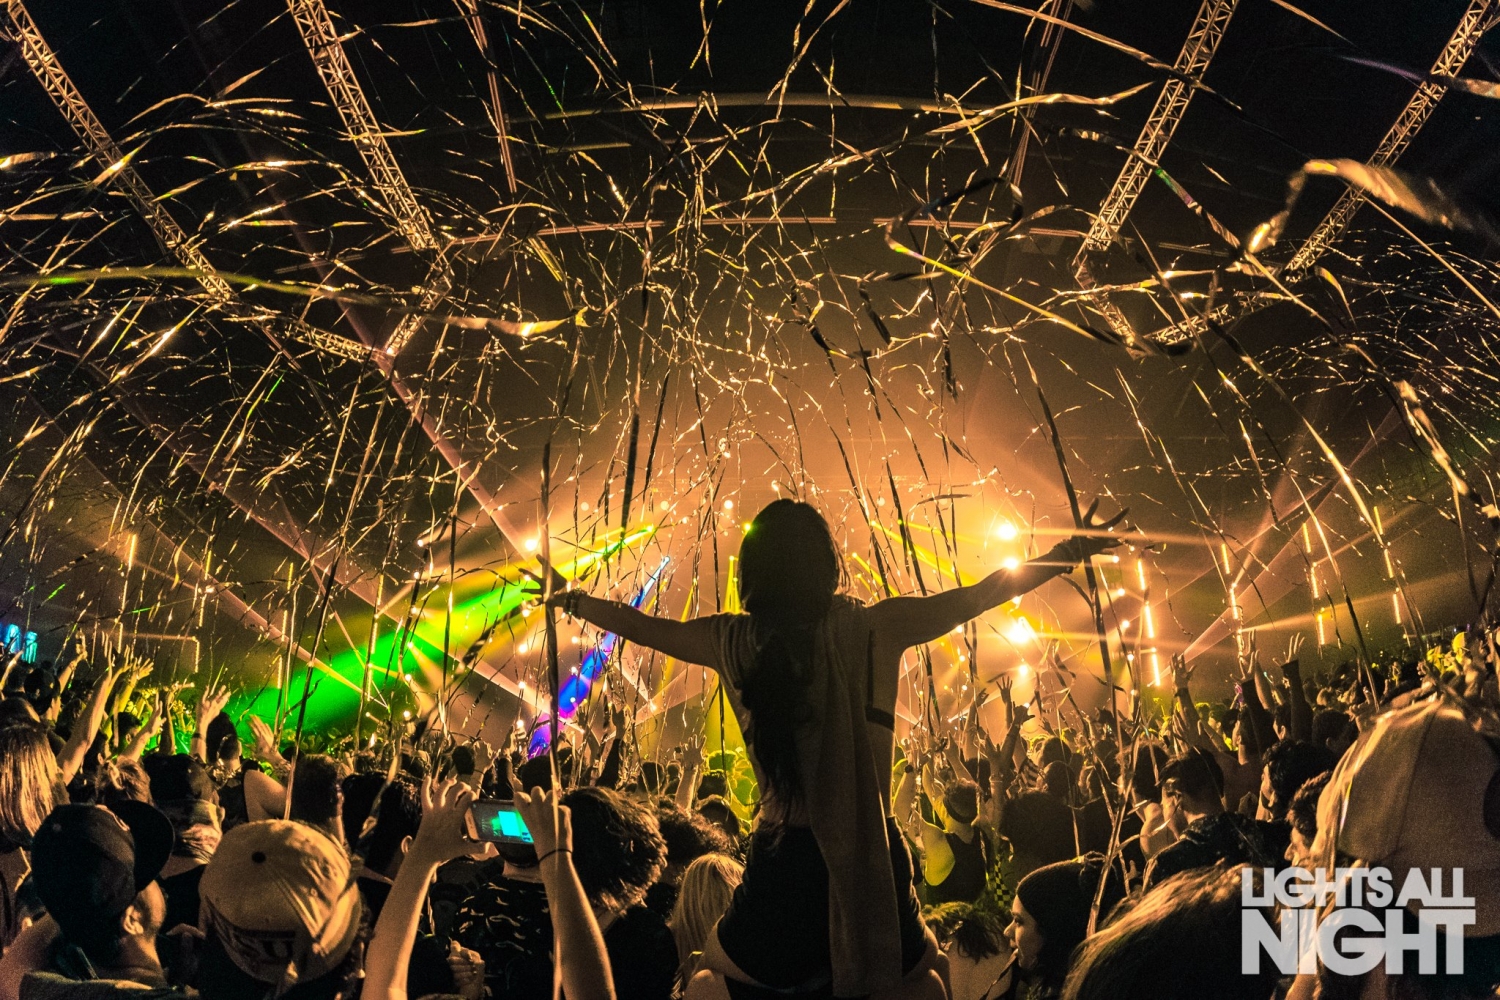 TOP 20 EDM & Electronic Music Festivals in the USA (2022 Edition